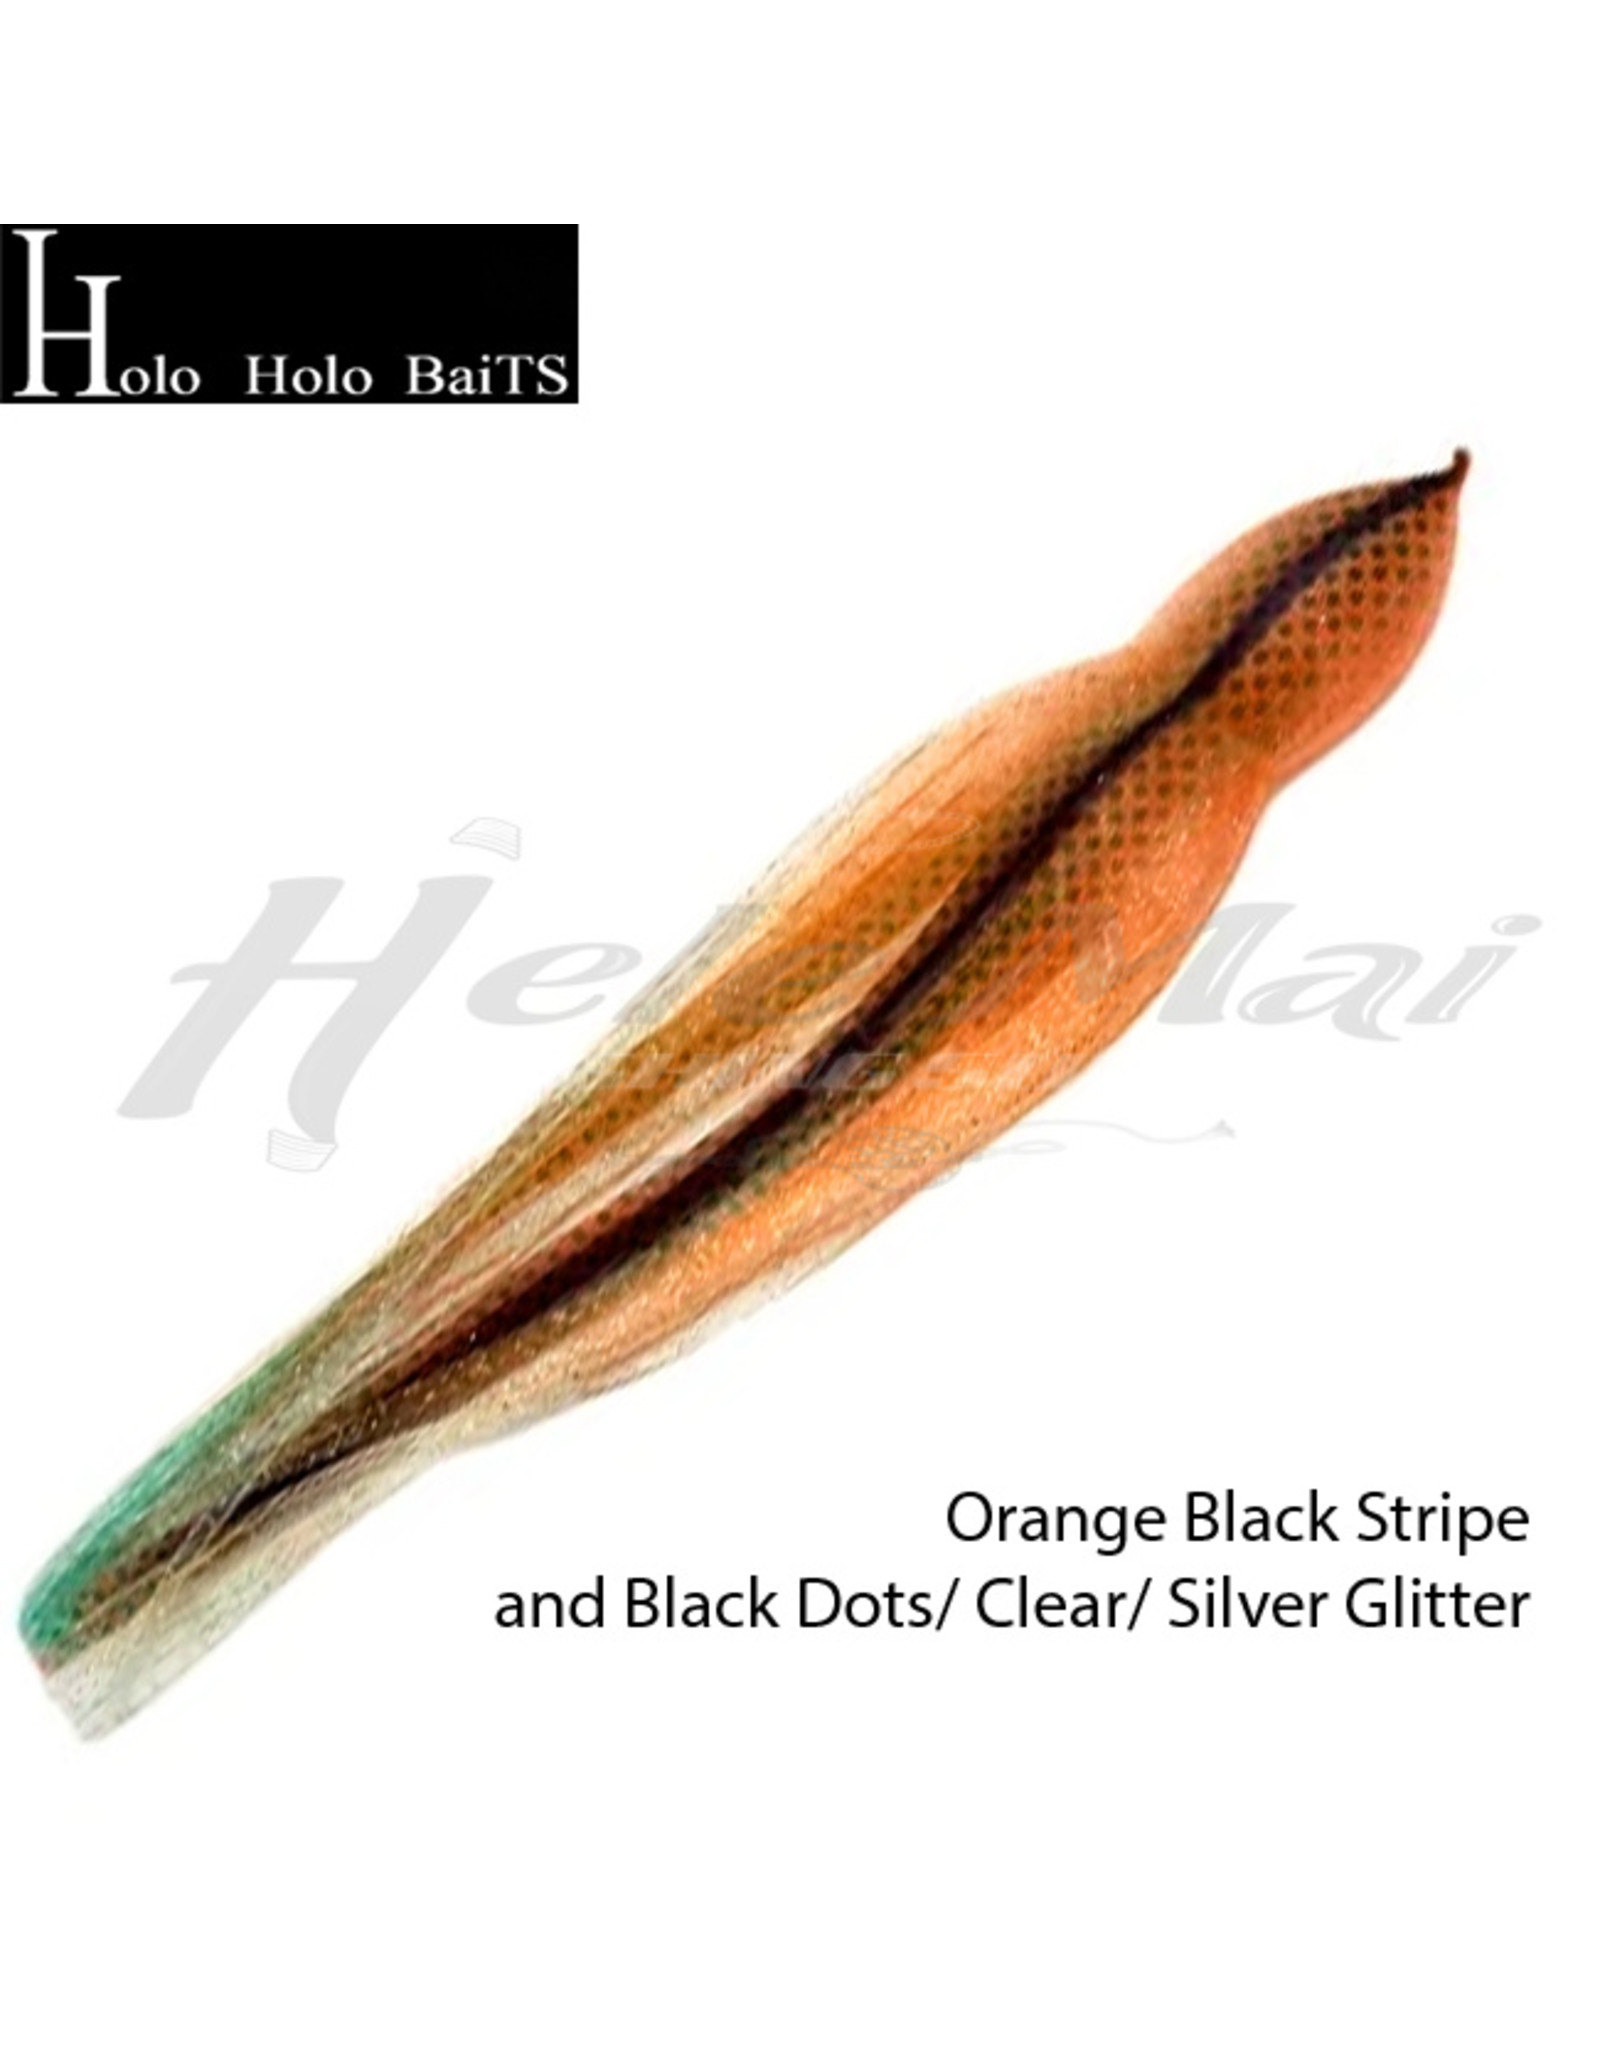 HOLO HOLO Squid Skirt, 7" Rootbeer Silver Glitter, 0109